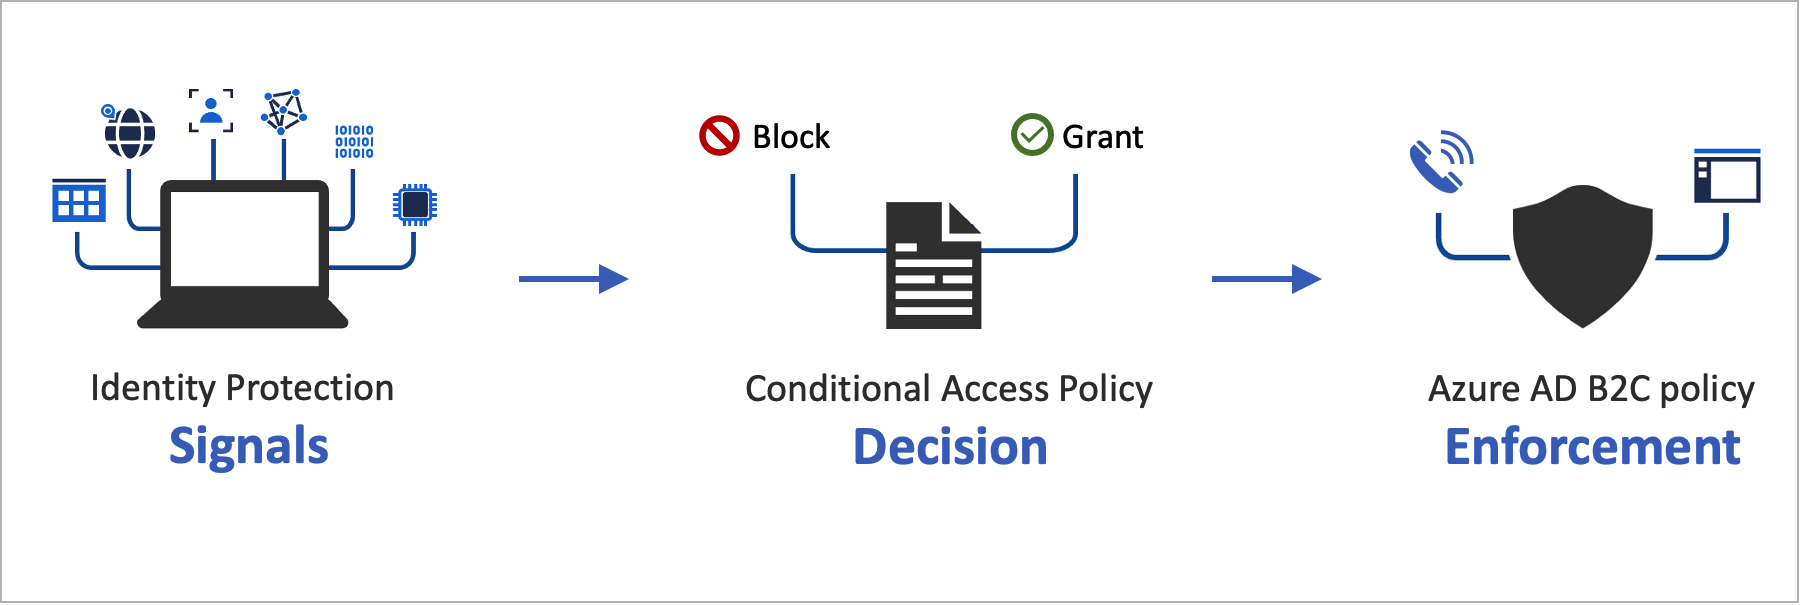 Diagram showing conditional access flow.